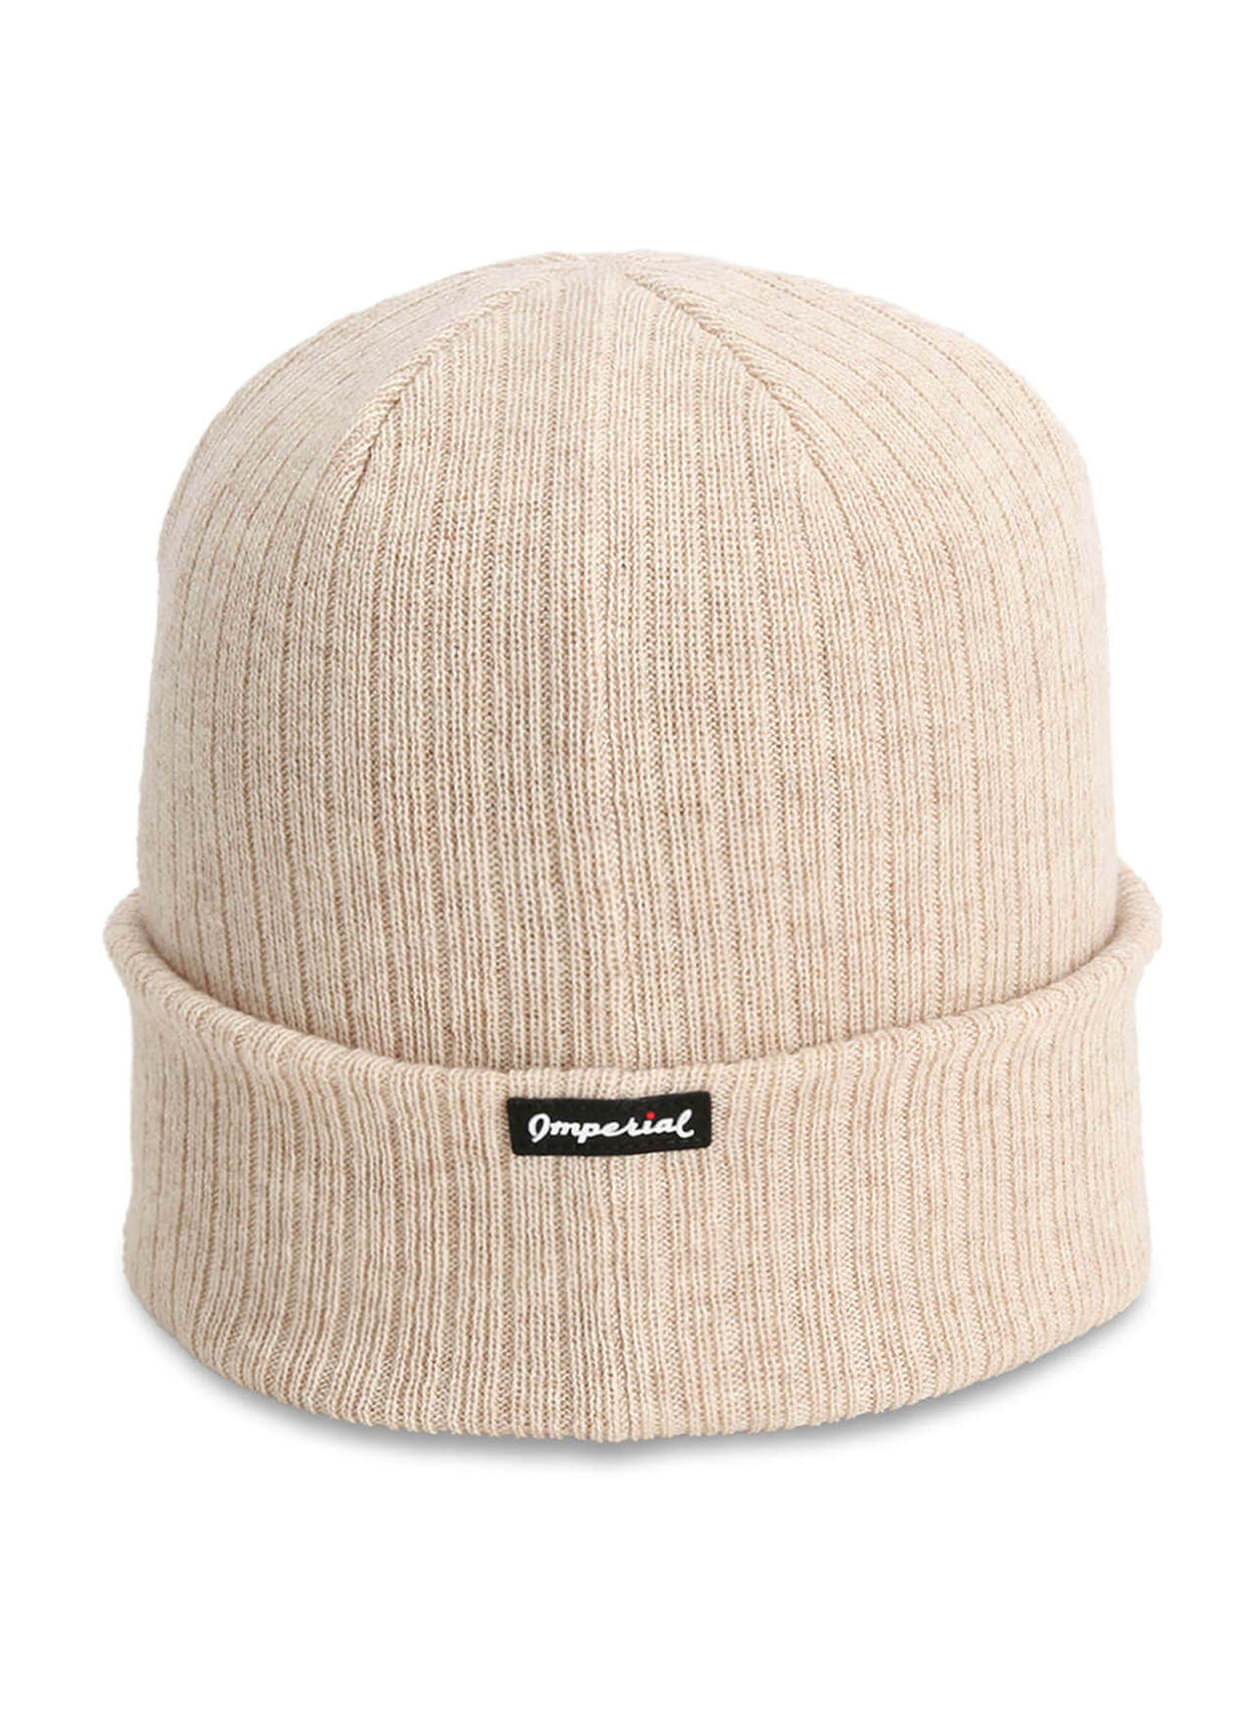 Imperial Sand The Edelweiss Cashmere and Wool Knit Beanie